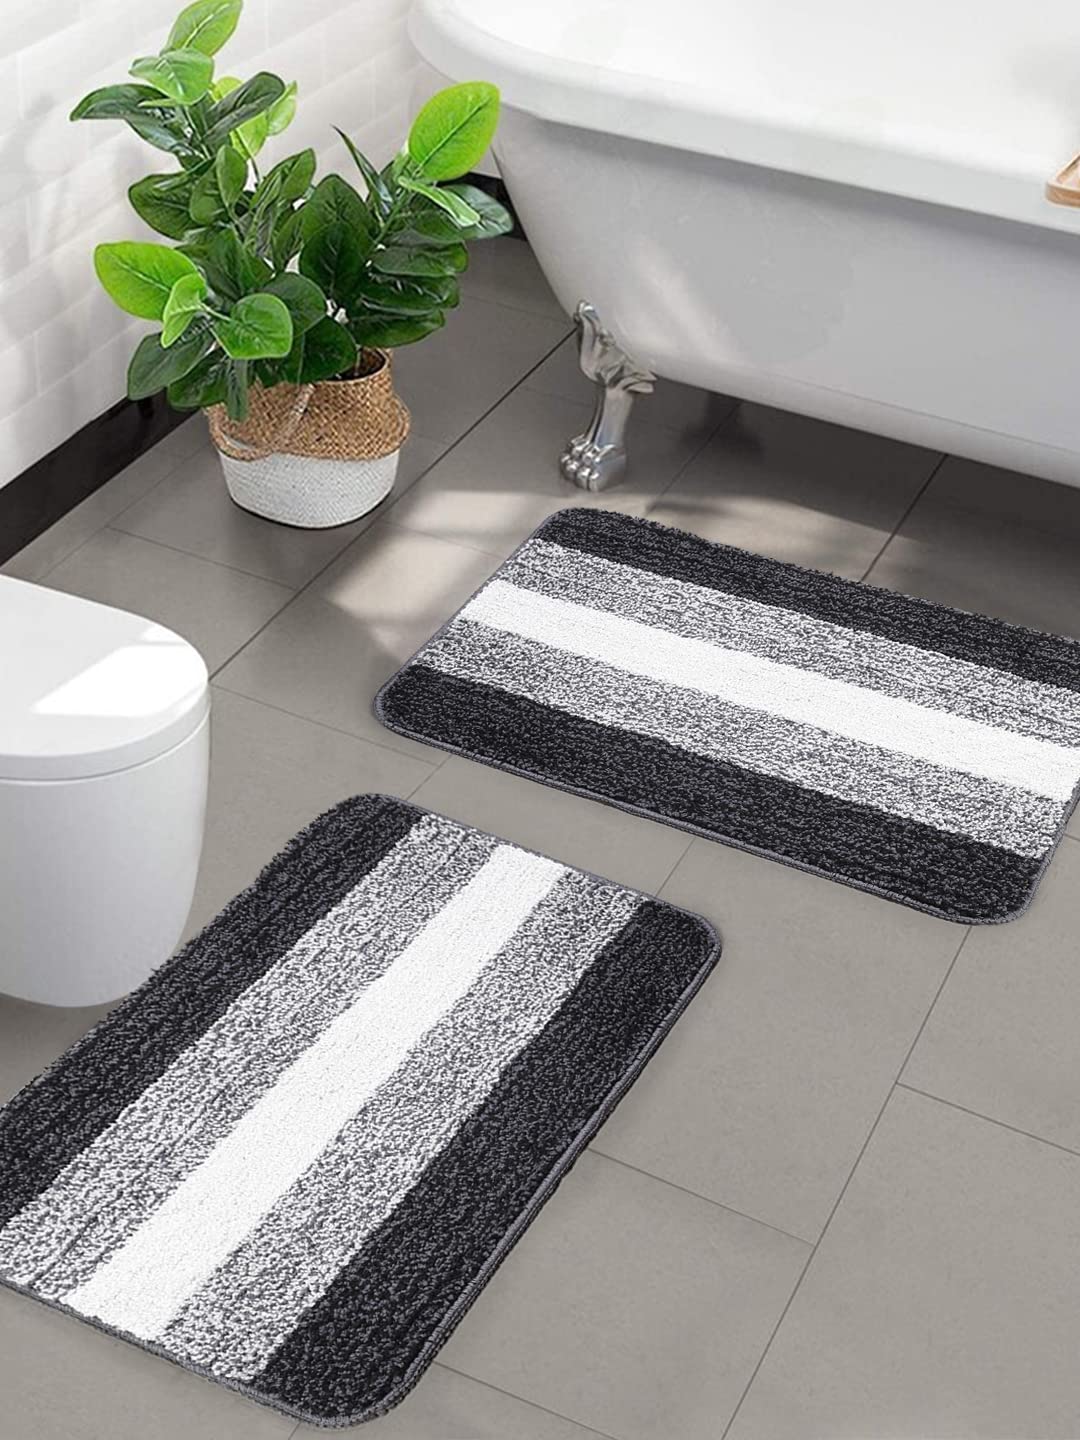 Kashyapa Rugs Collection - Affordable Mat for Floor Black & Grey Super Soft Microfiber Door Mats for Home & Office.